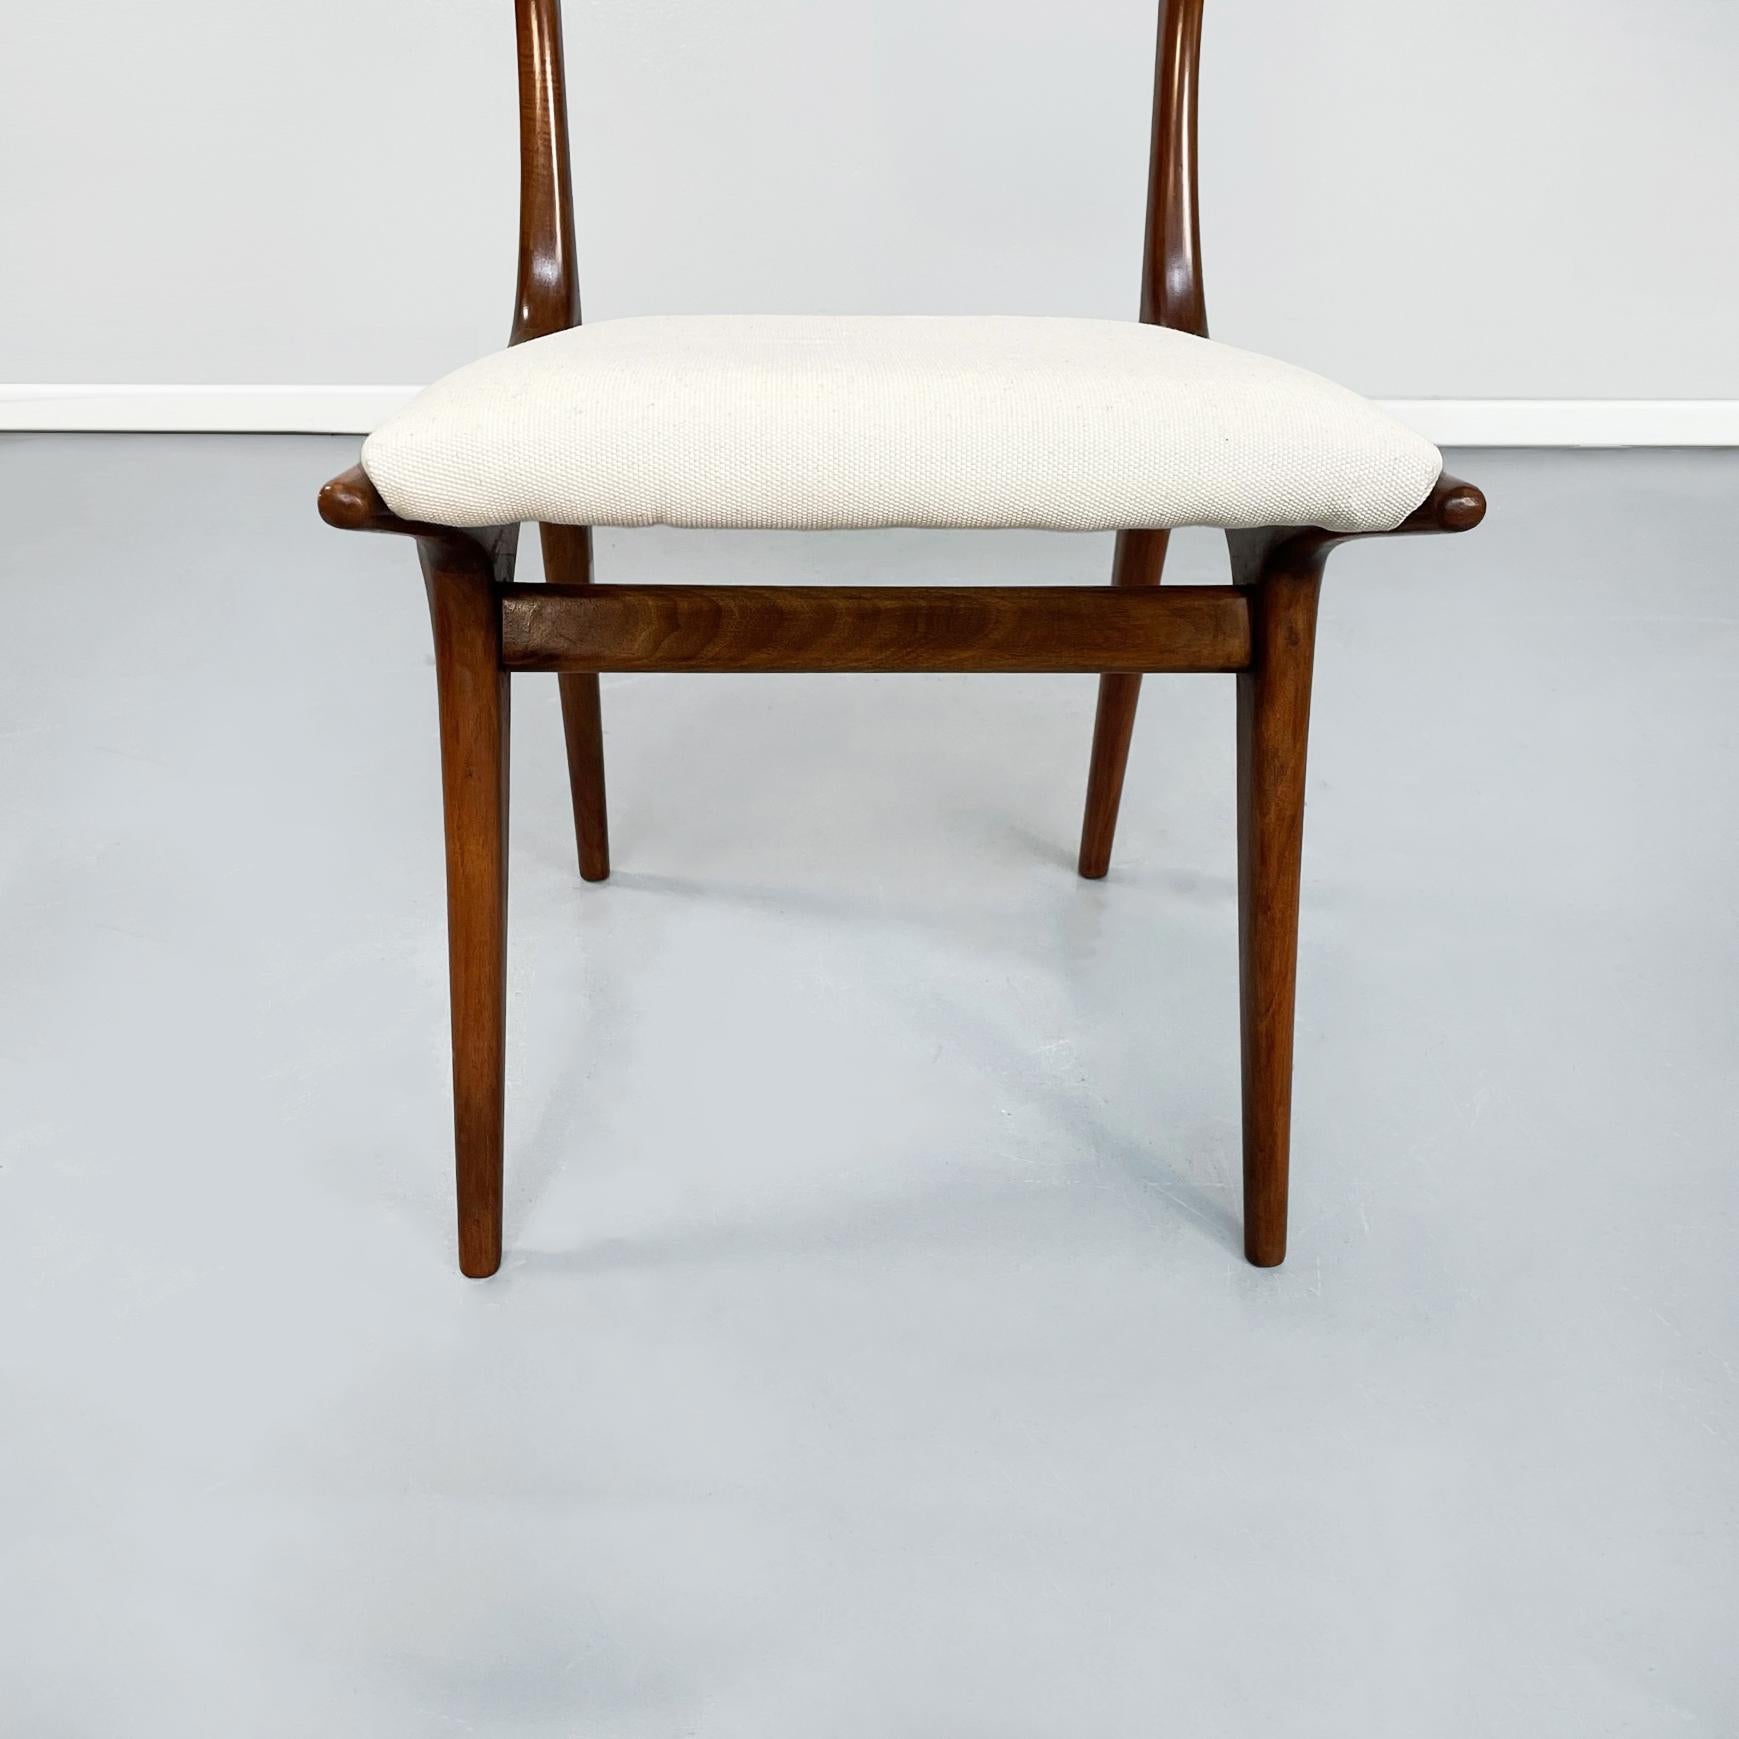 Italinan Mid-Century Modern White Fabric N Wood Chairs by De Carli Cassina, 1958 For Sale 5